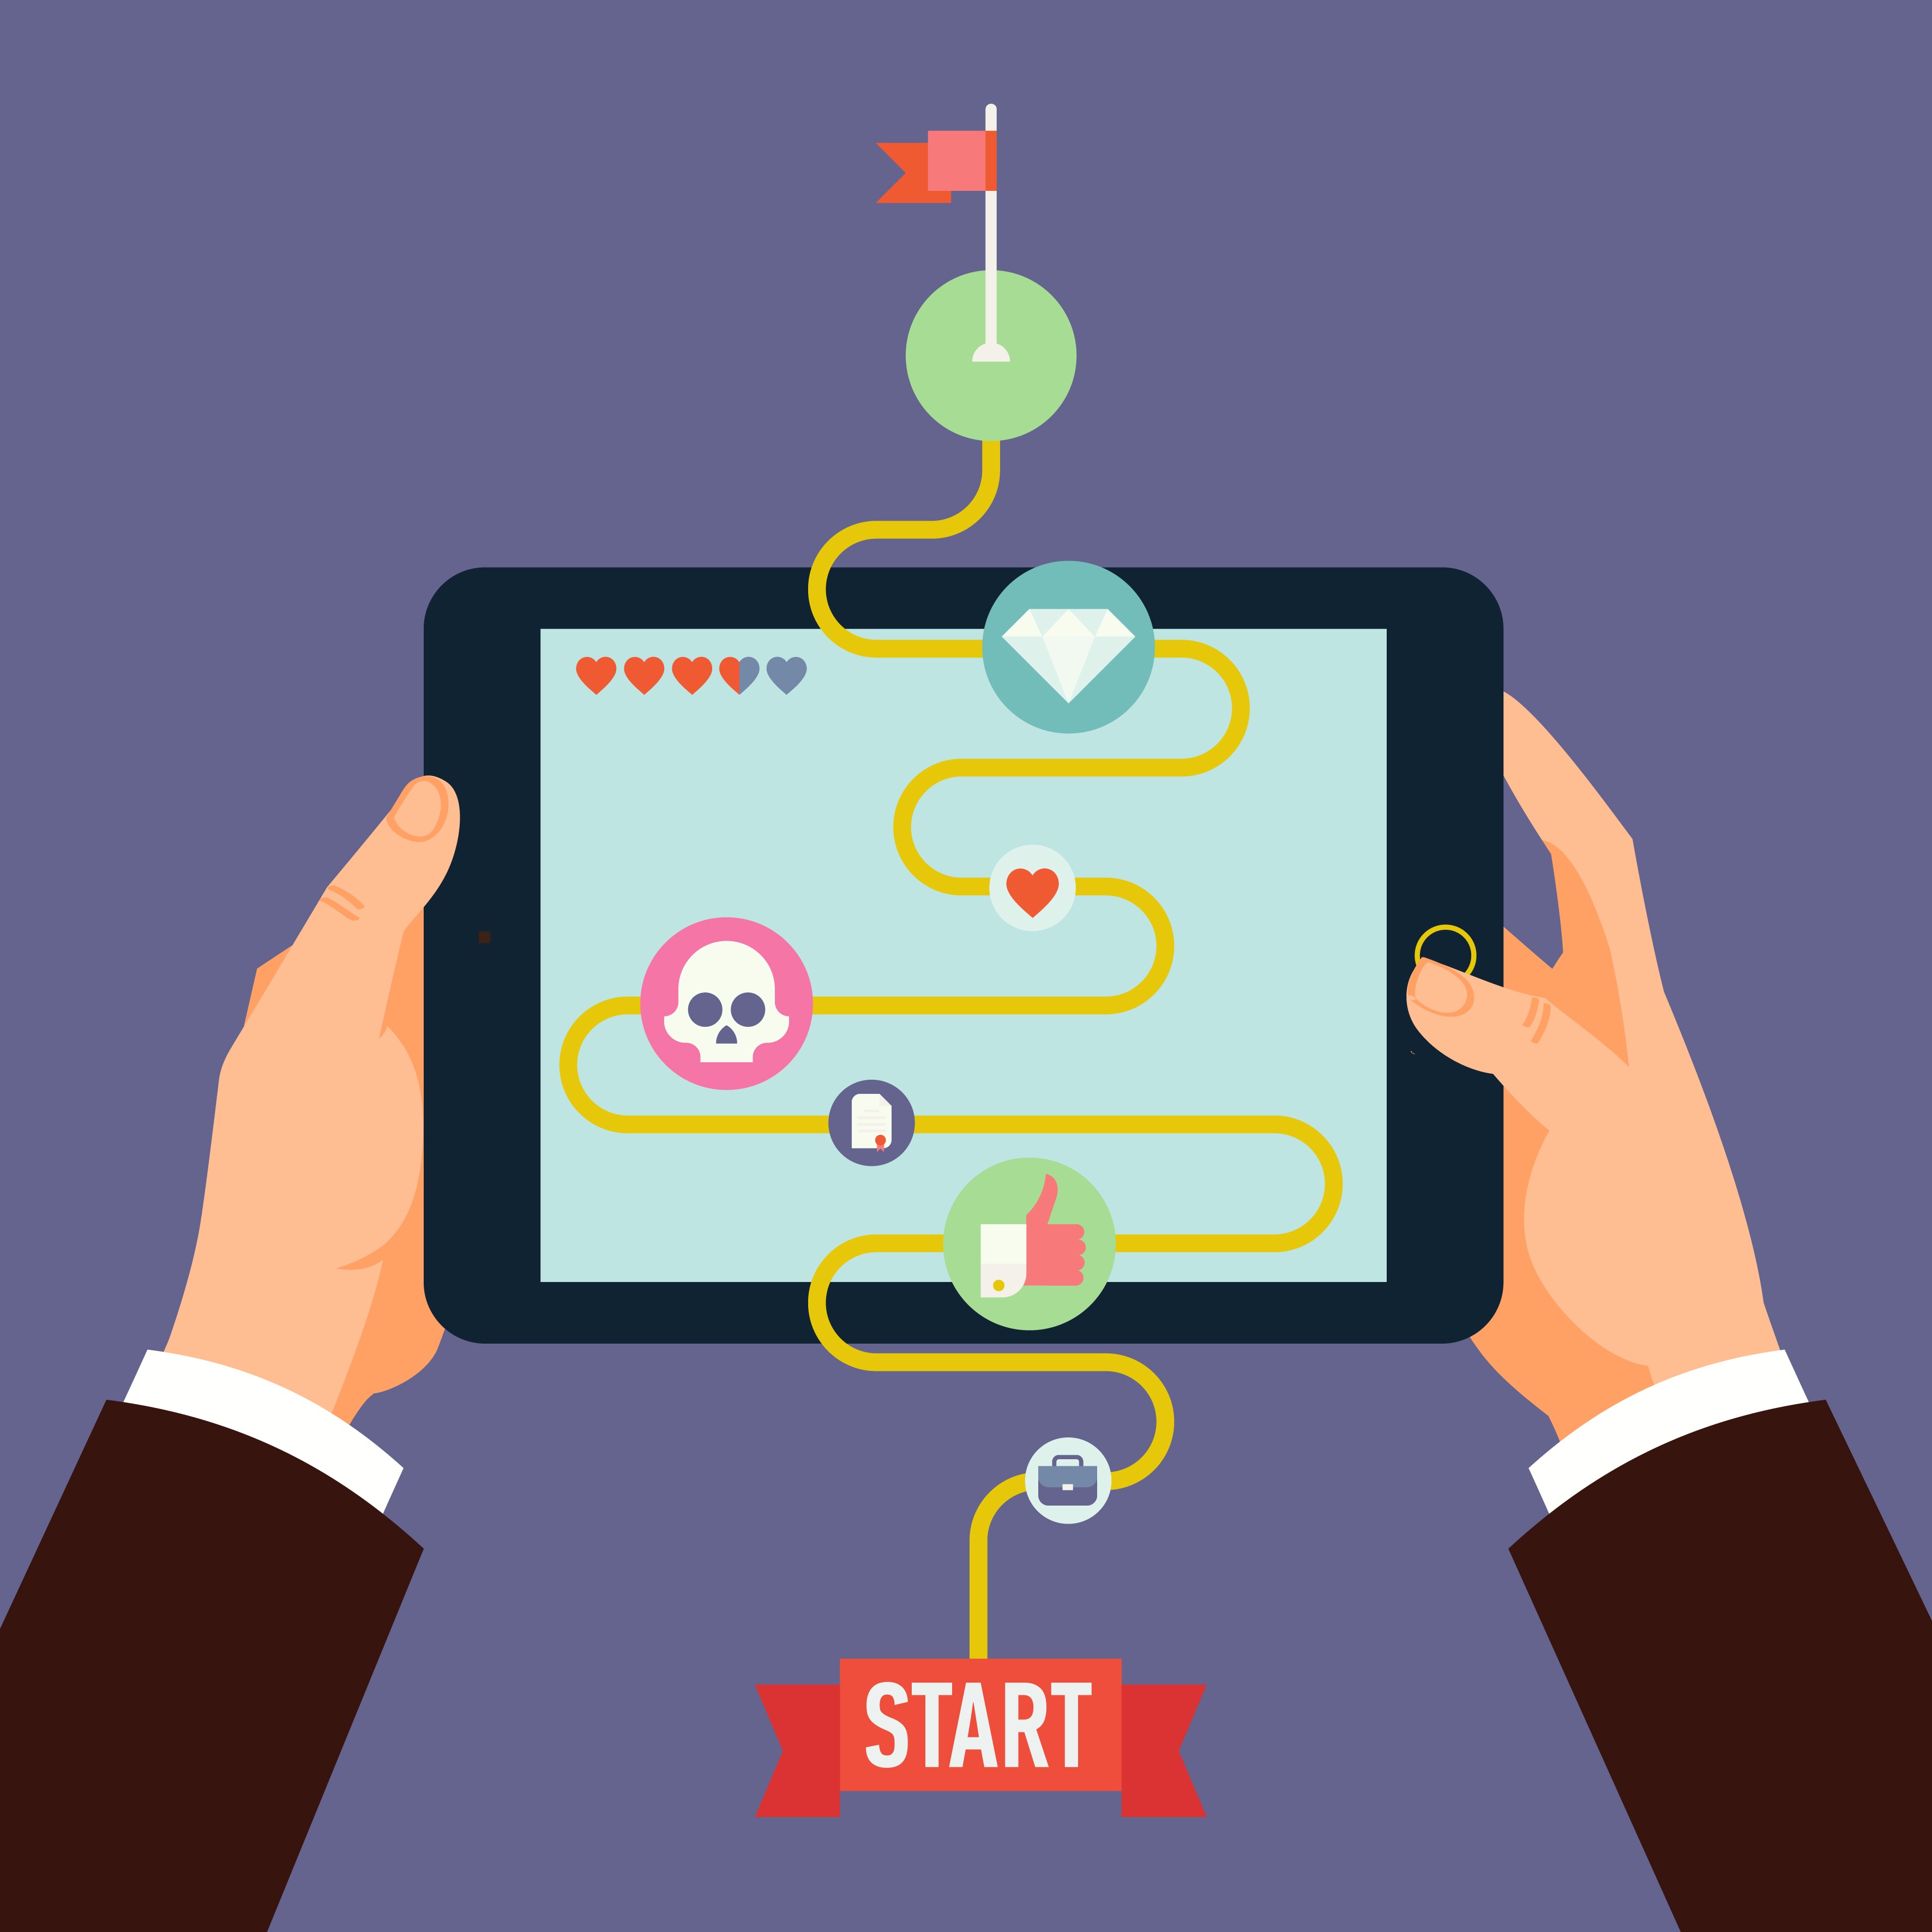 Gamification - Definition, Techniques, And Its Value In Business & Workplace